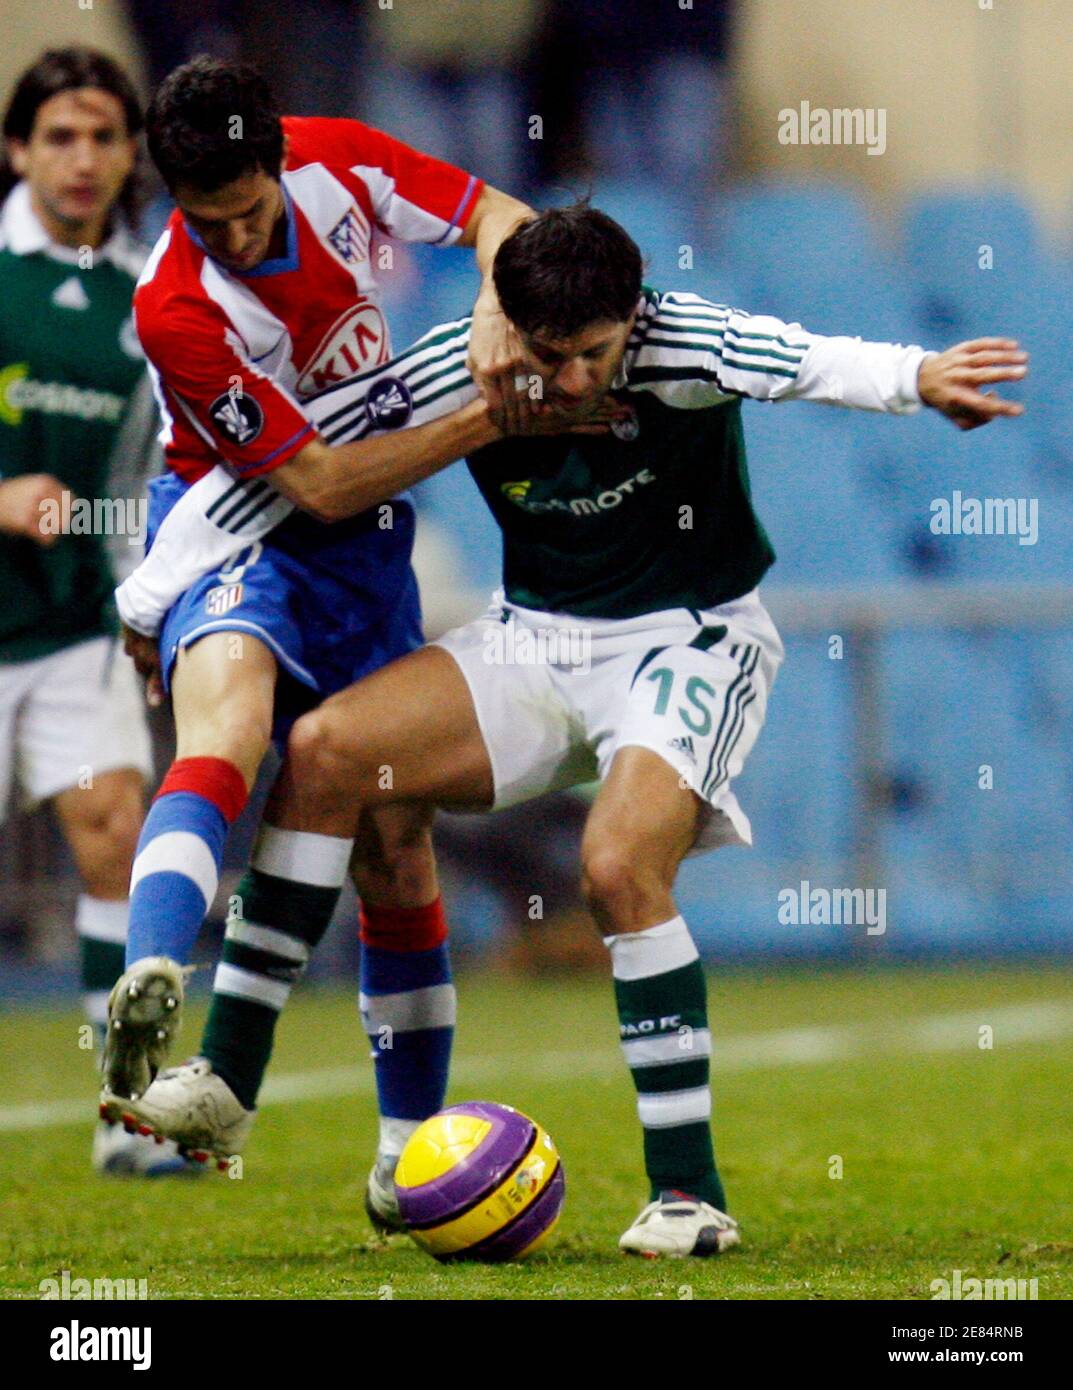 Atletico Madrid's Luis Garcia (L) and Panathinaikos' Panagiotis Fissas  fight for the ball during their UEFA Cup Group B soccer match at Madrid's  Vicente Calderon stadium December 20, 2007. REUTERS/Andrea Comas (SPAIN